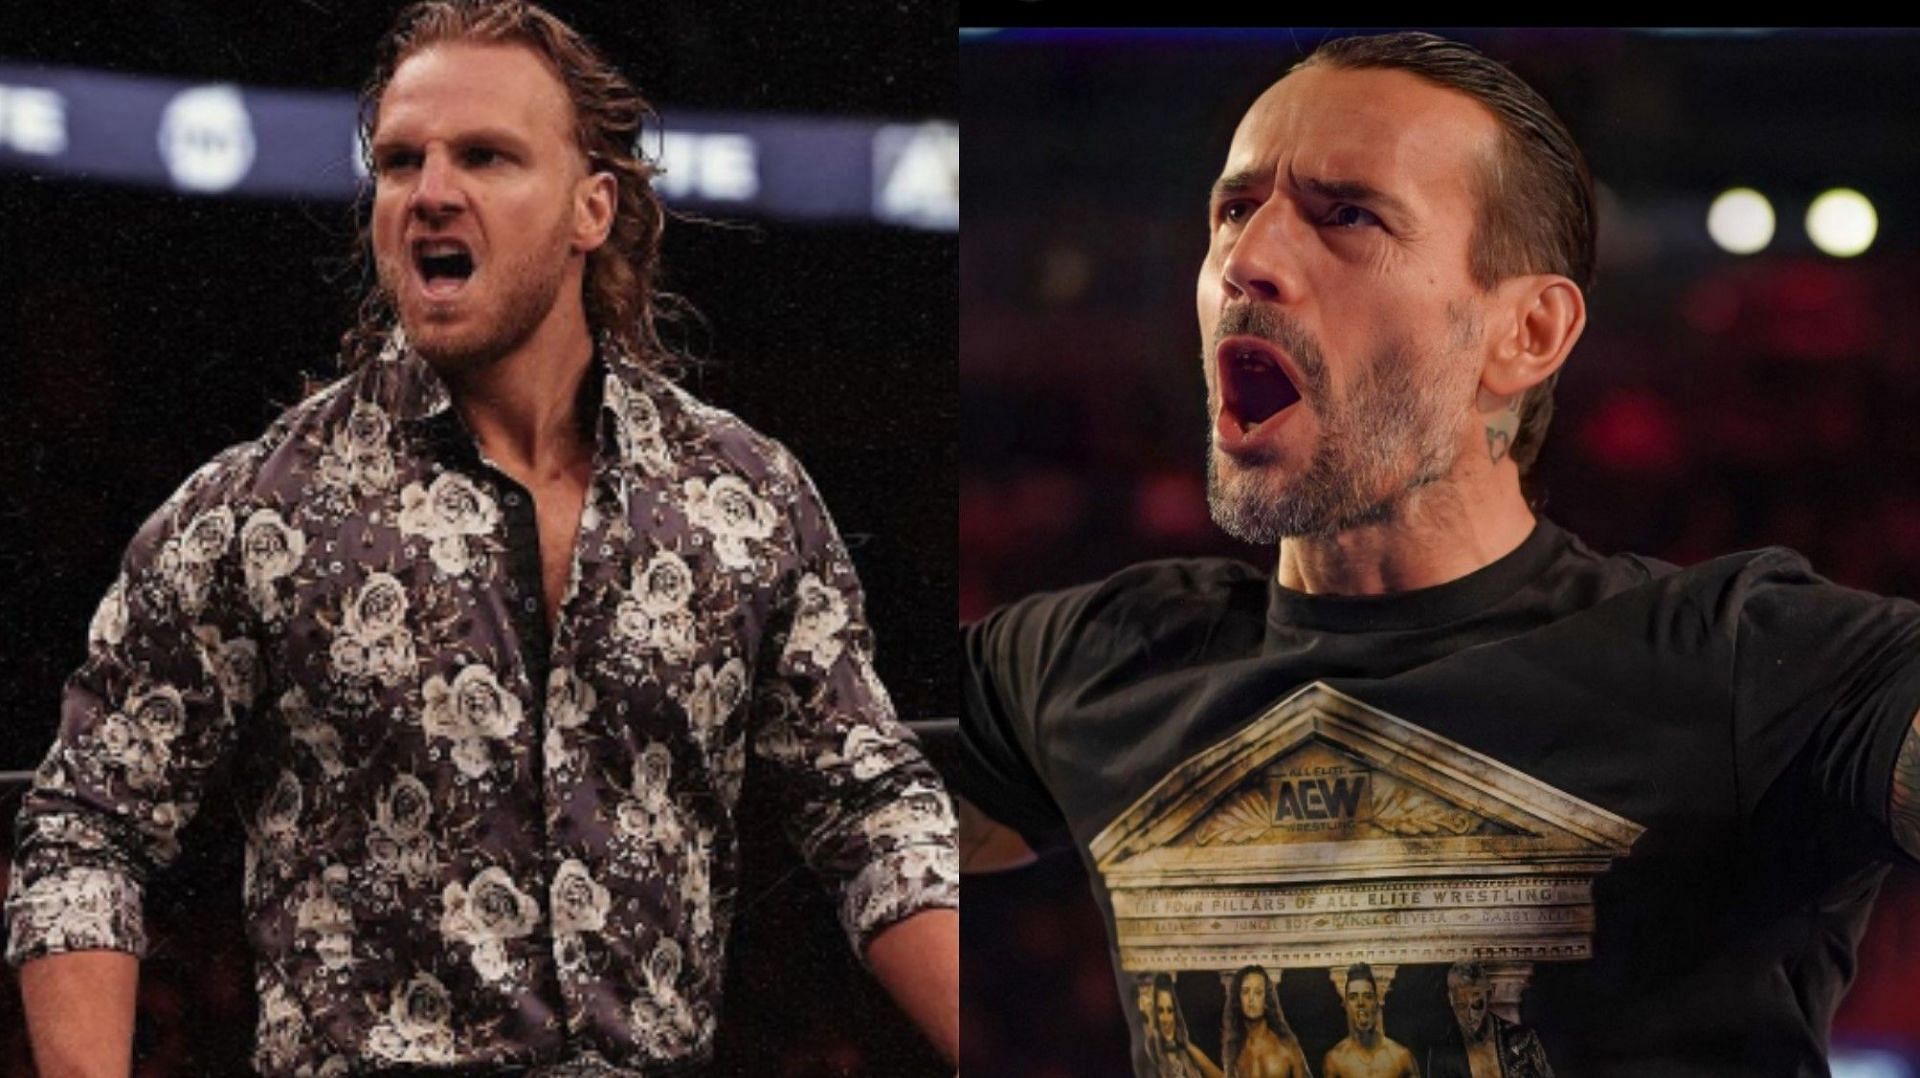 Hangman Page (left) and CM Punk (right)